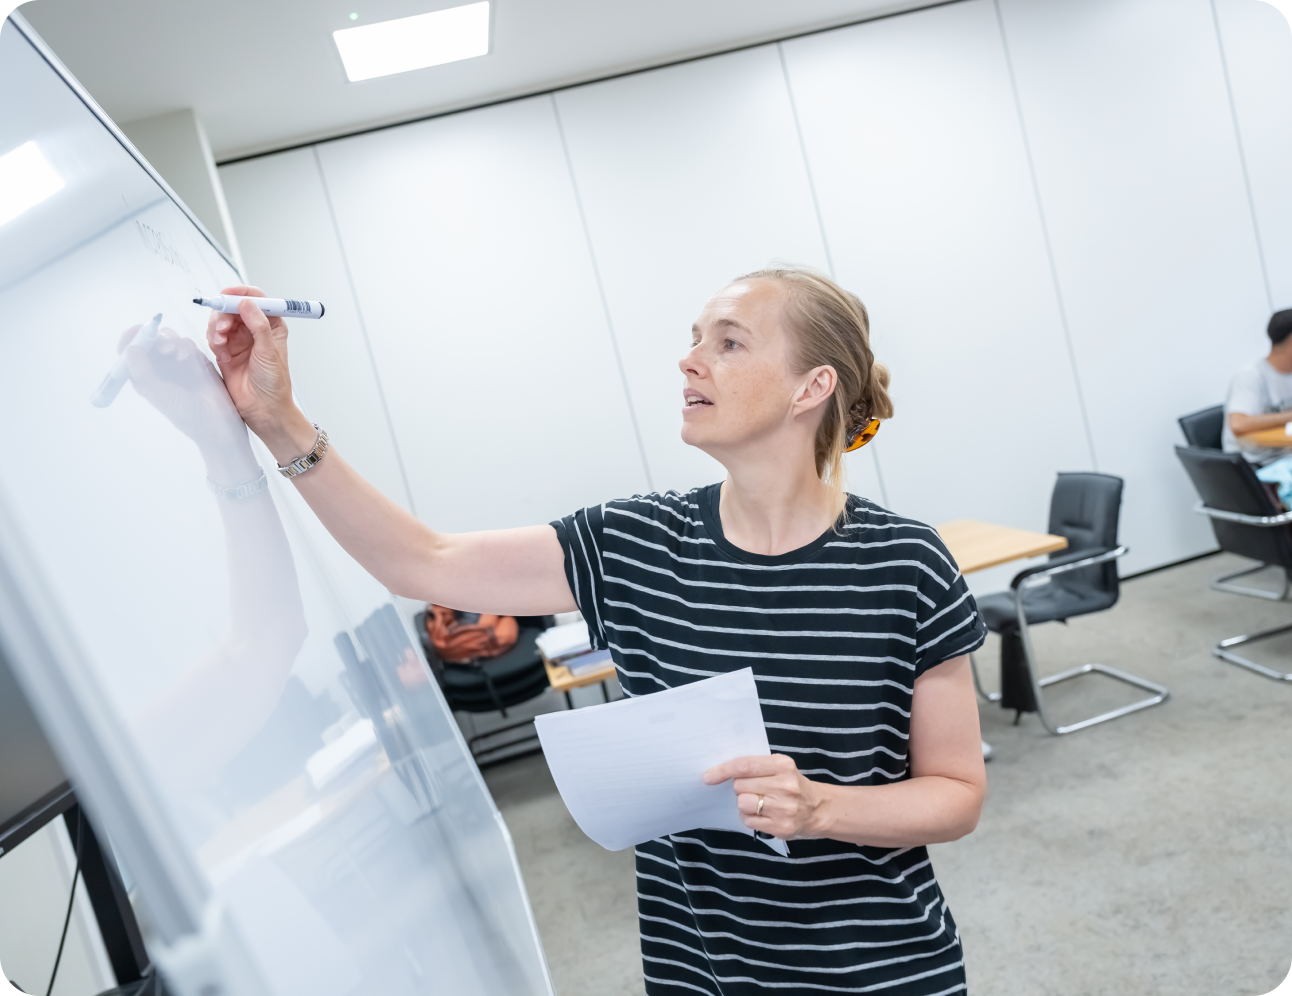 training business lady in striped tshirt writing on board with pen and holding paper